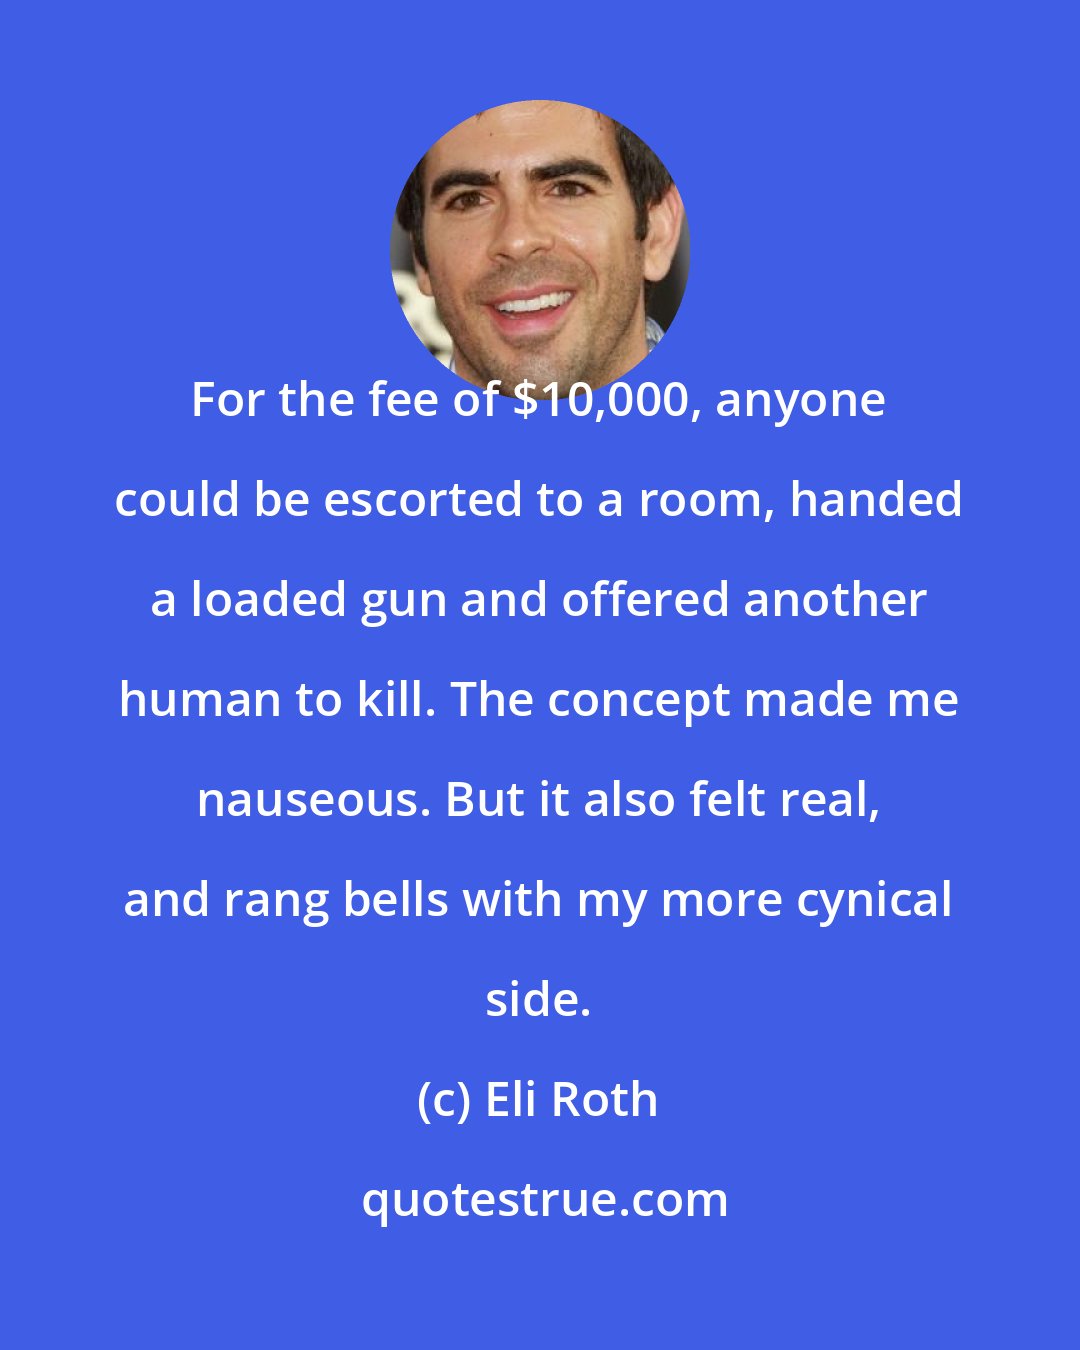 Eli Roth: For the fee of $10,000, anyone could be escorted to a room, handed a loaded gun and offered another human to kill. The concept made me nauseous. But it also felt real, and rang bells with my more cynical side.